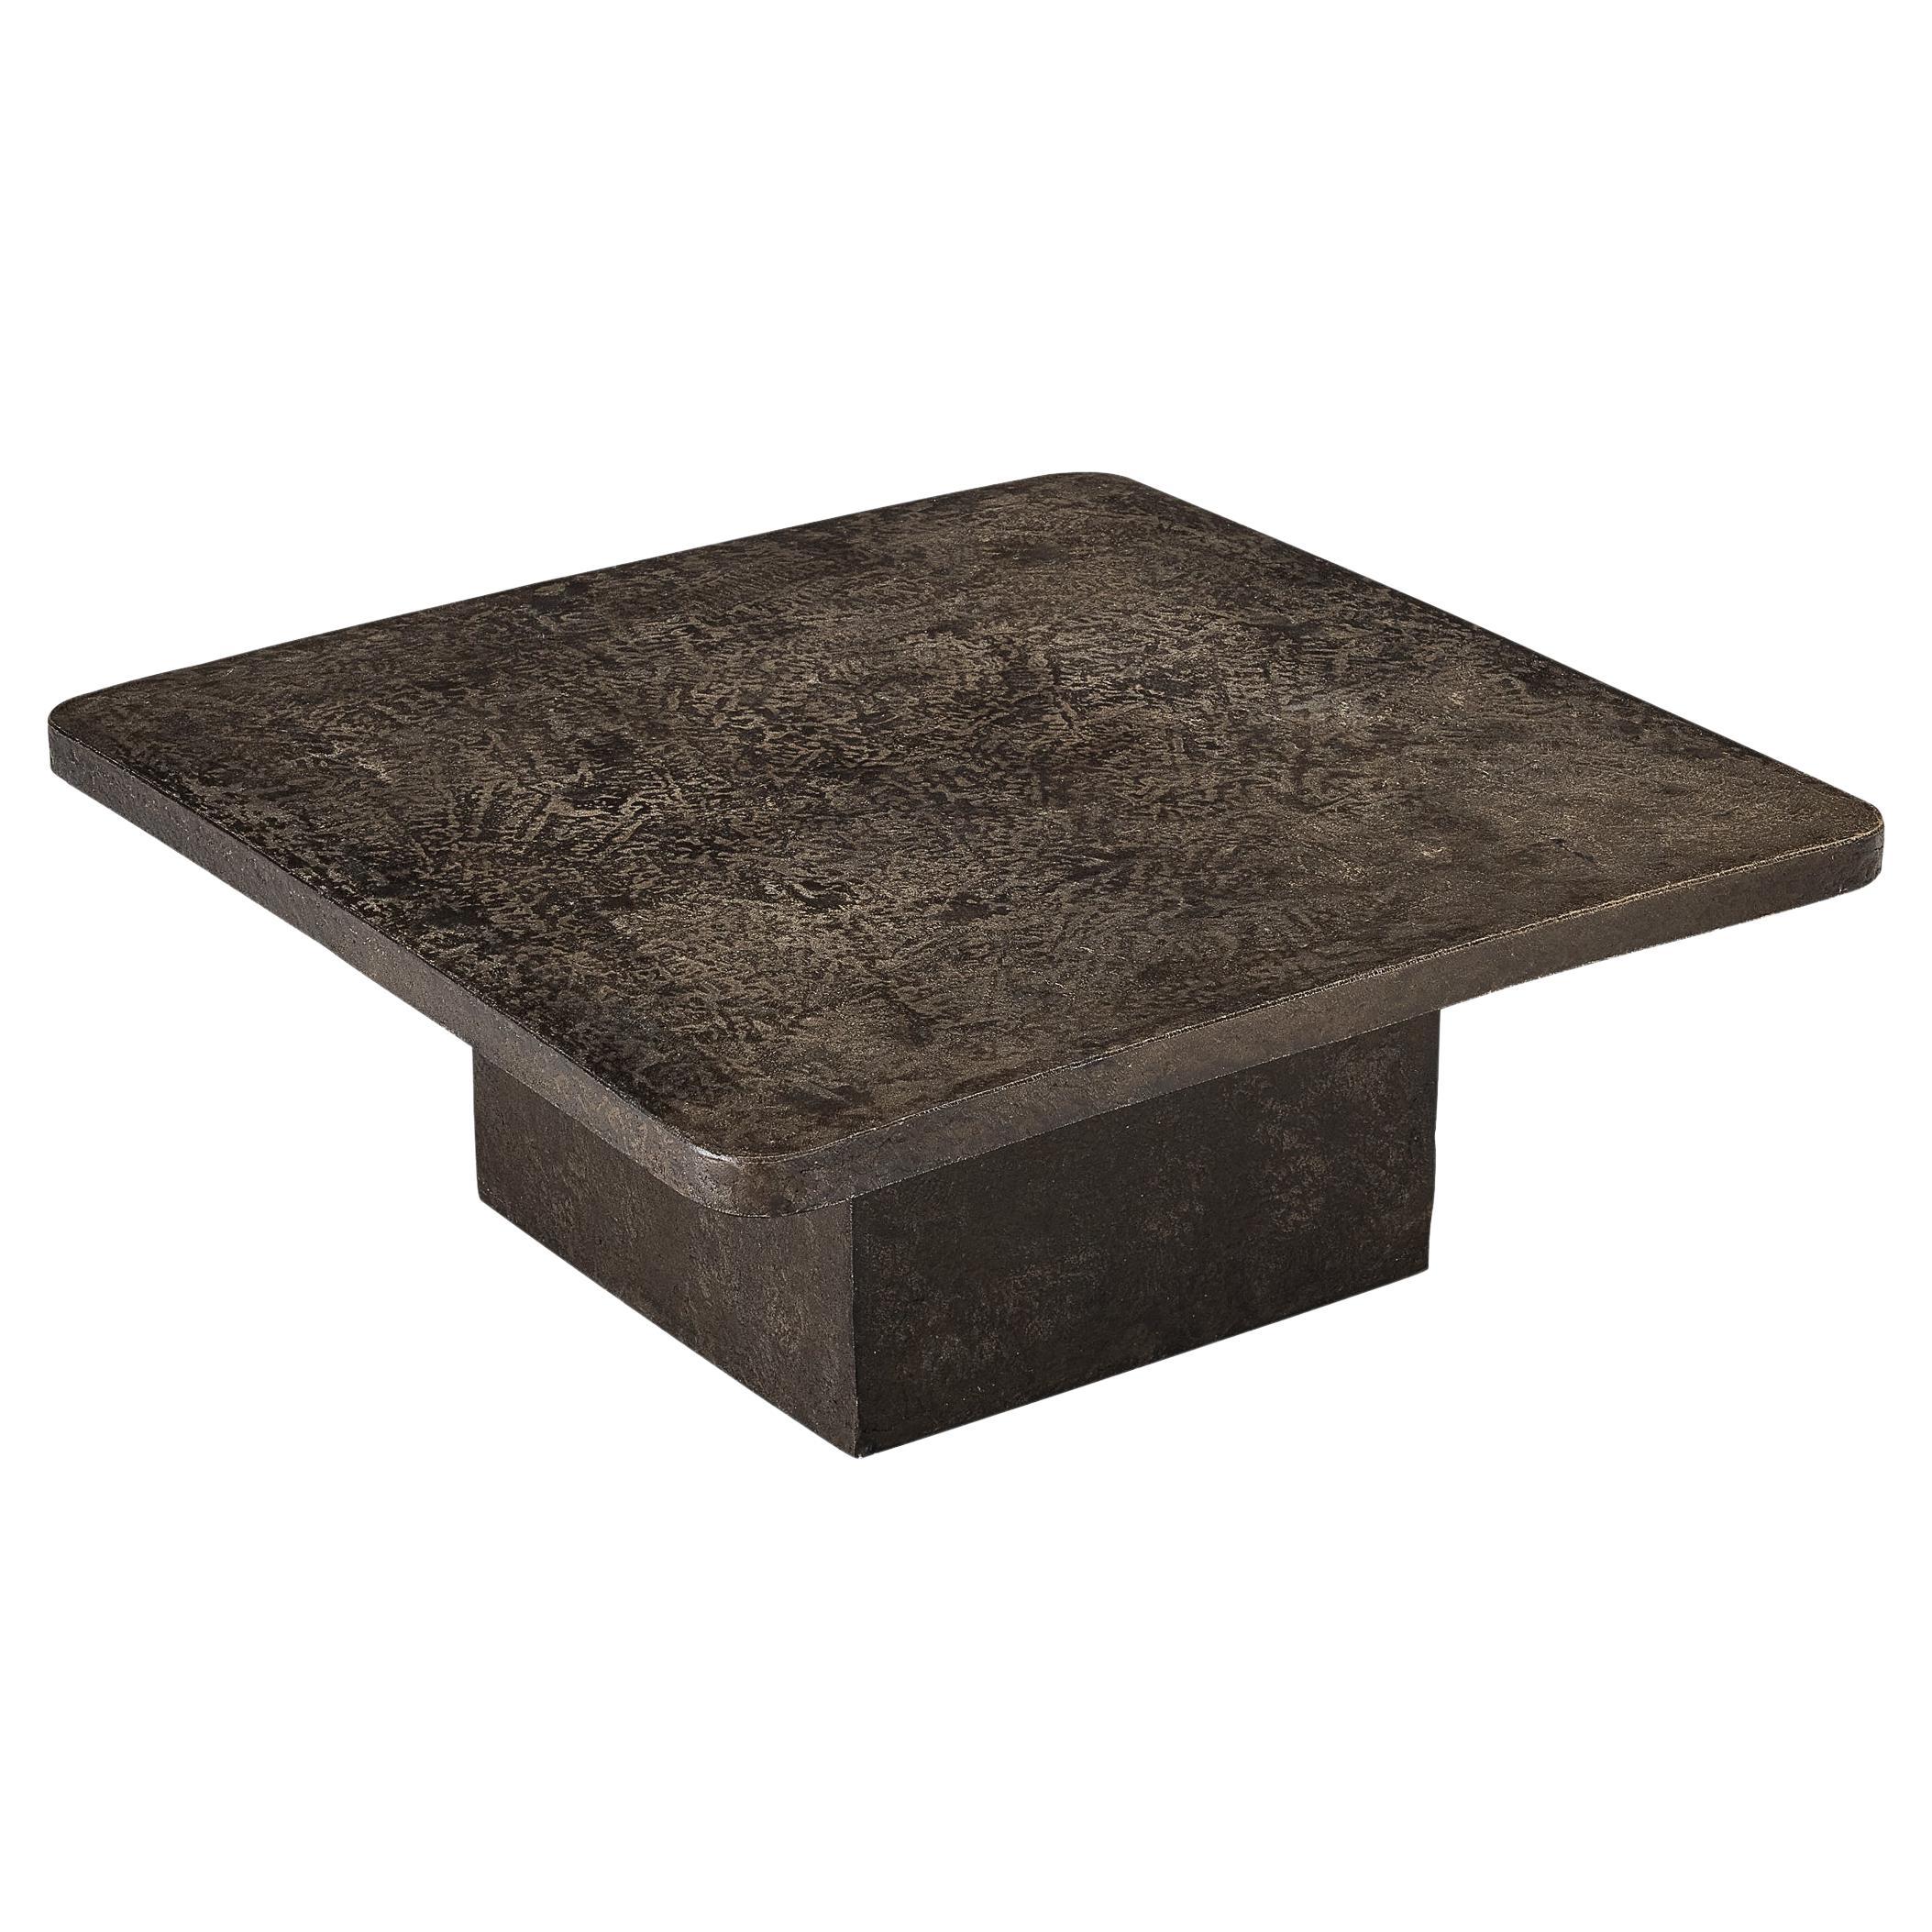 Brutalist Square Coffee Table in Textured Stone Look Resin 